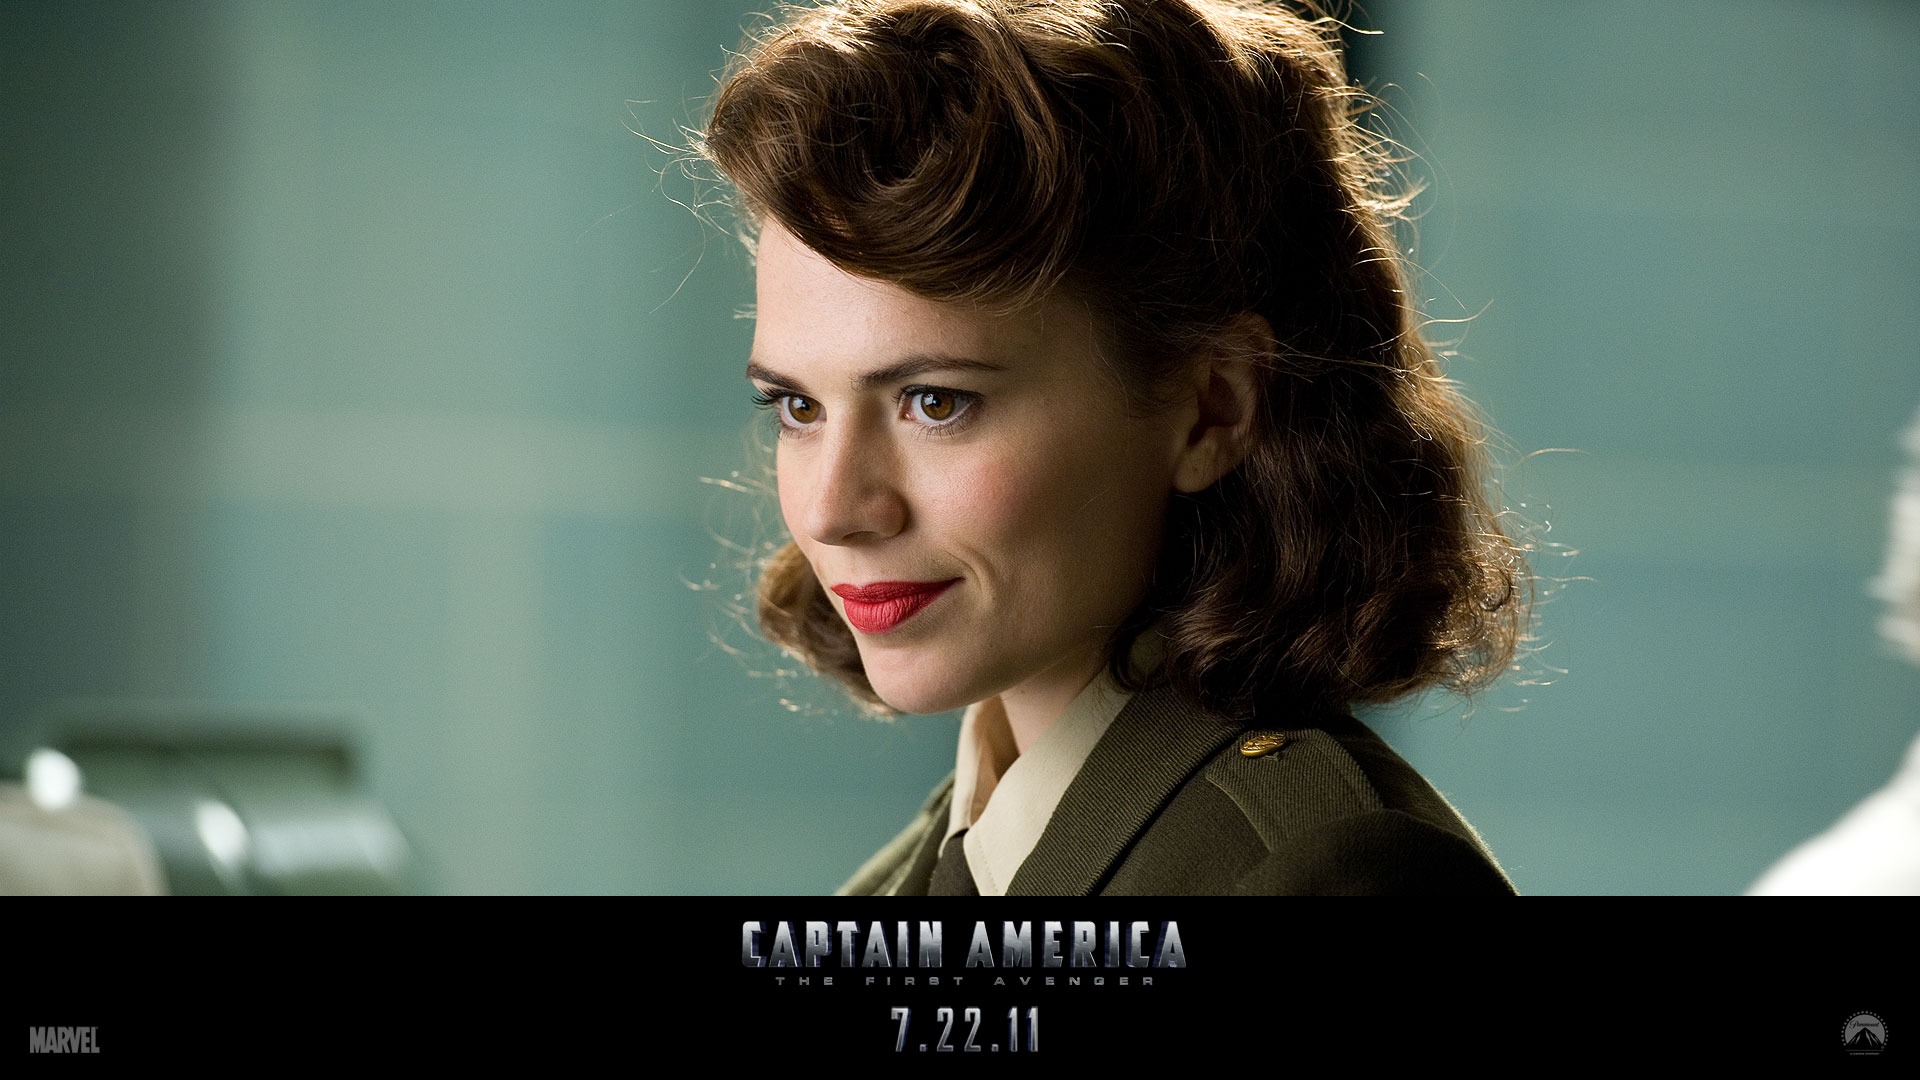 Captain America: The First Avenger wallpapers HD #11 - 1920x1080